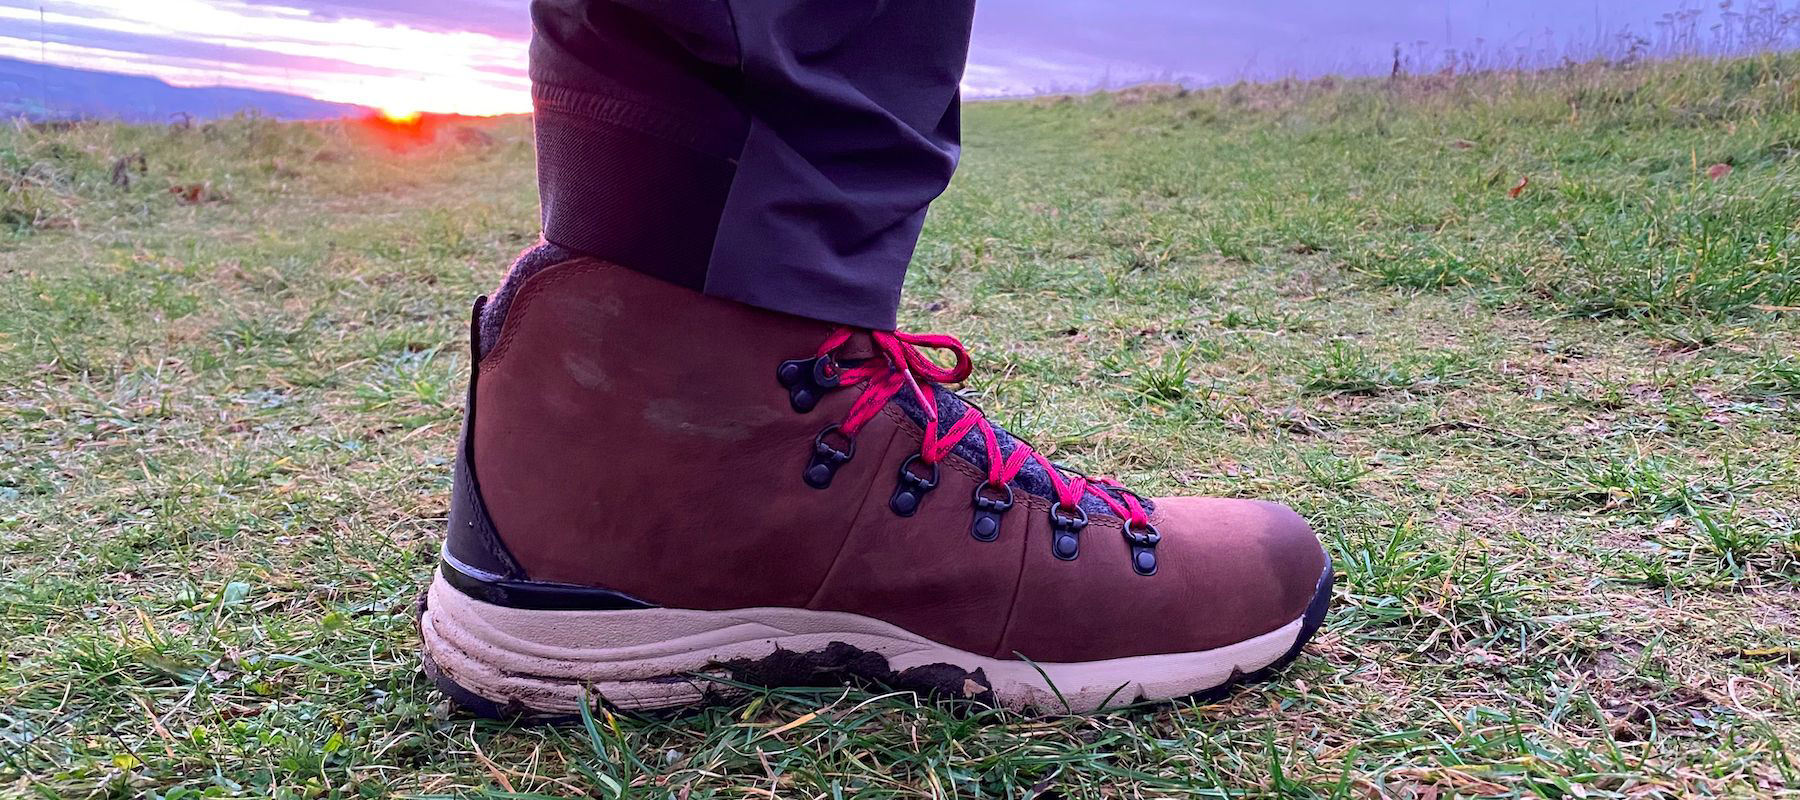 Danner Mountain 600 Insulated winter boots review: outstanding warmth ...